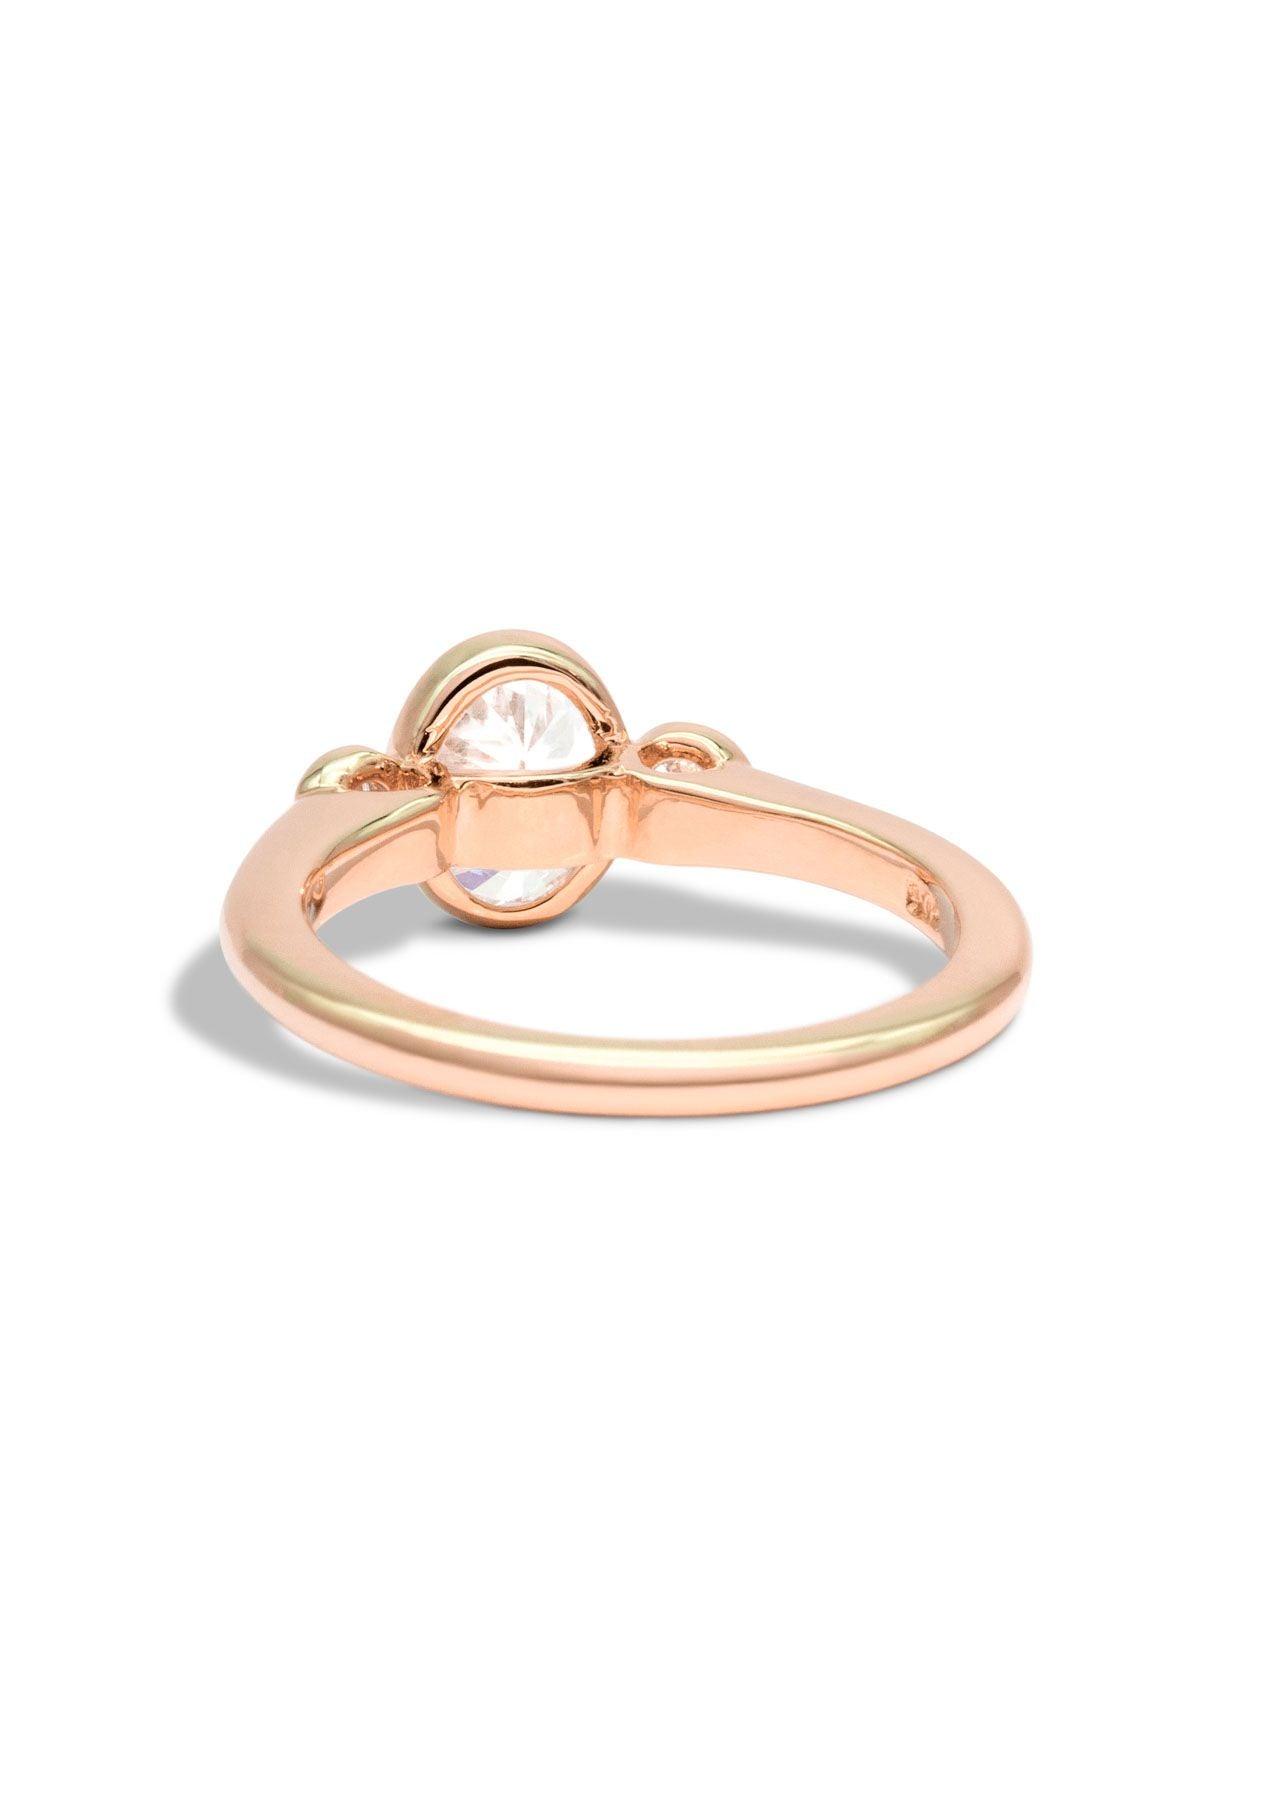 The Beatrice Rose Gold Cultured Diamond Ring